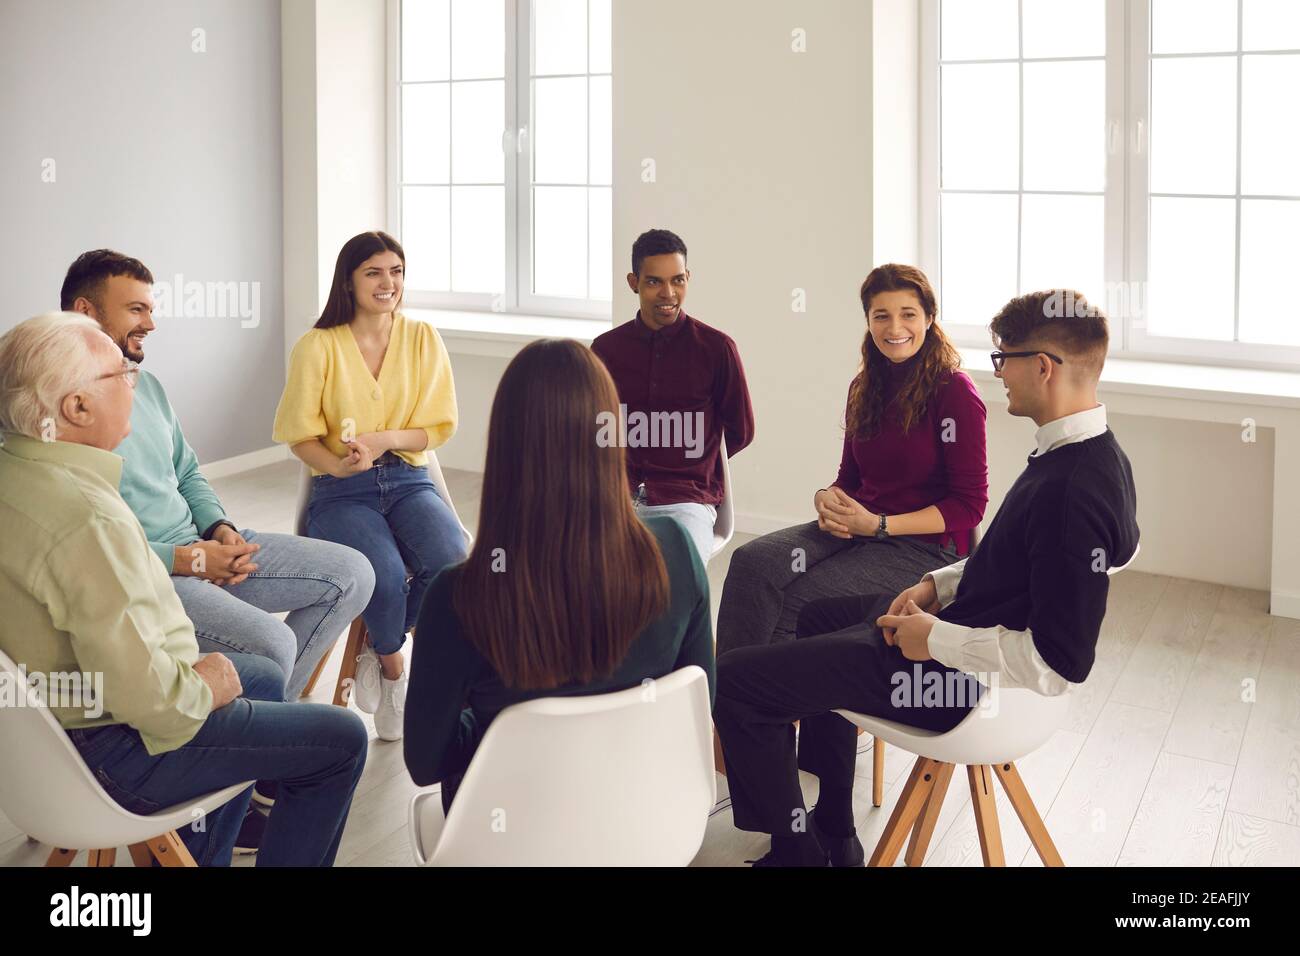 Smiling diverse people listening to young man sharing his story in a group therapy session Stock Photo